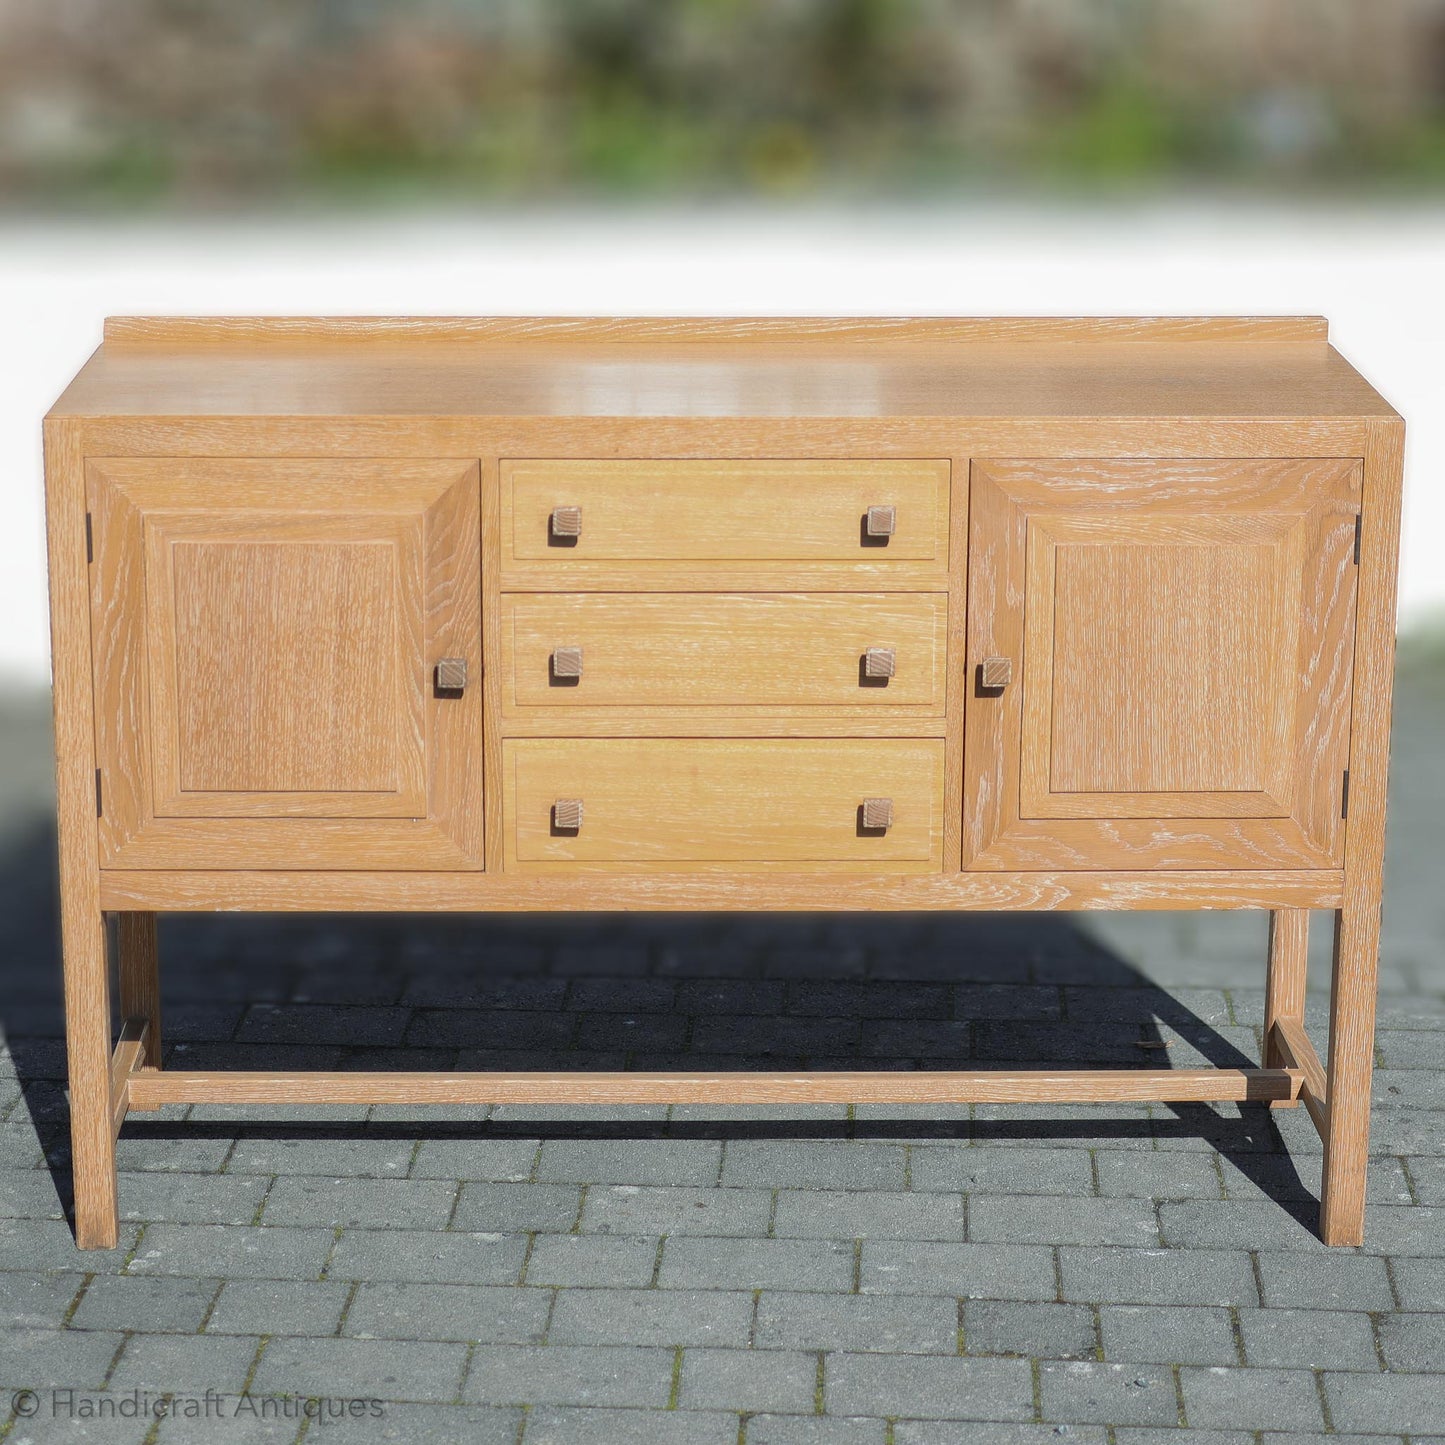 Heal and Co [Ambrose Heal] Arts & Crafts Cotswold School English Oak Sideboard 